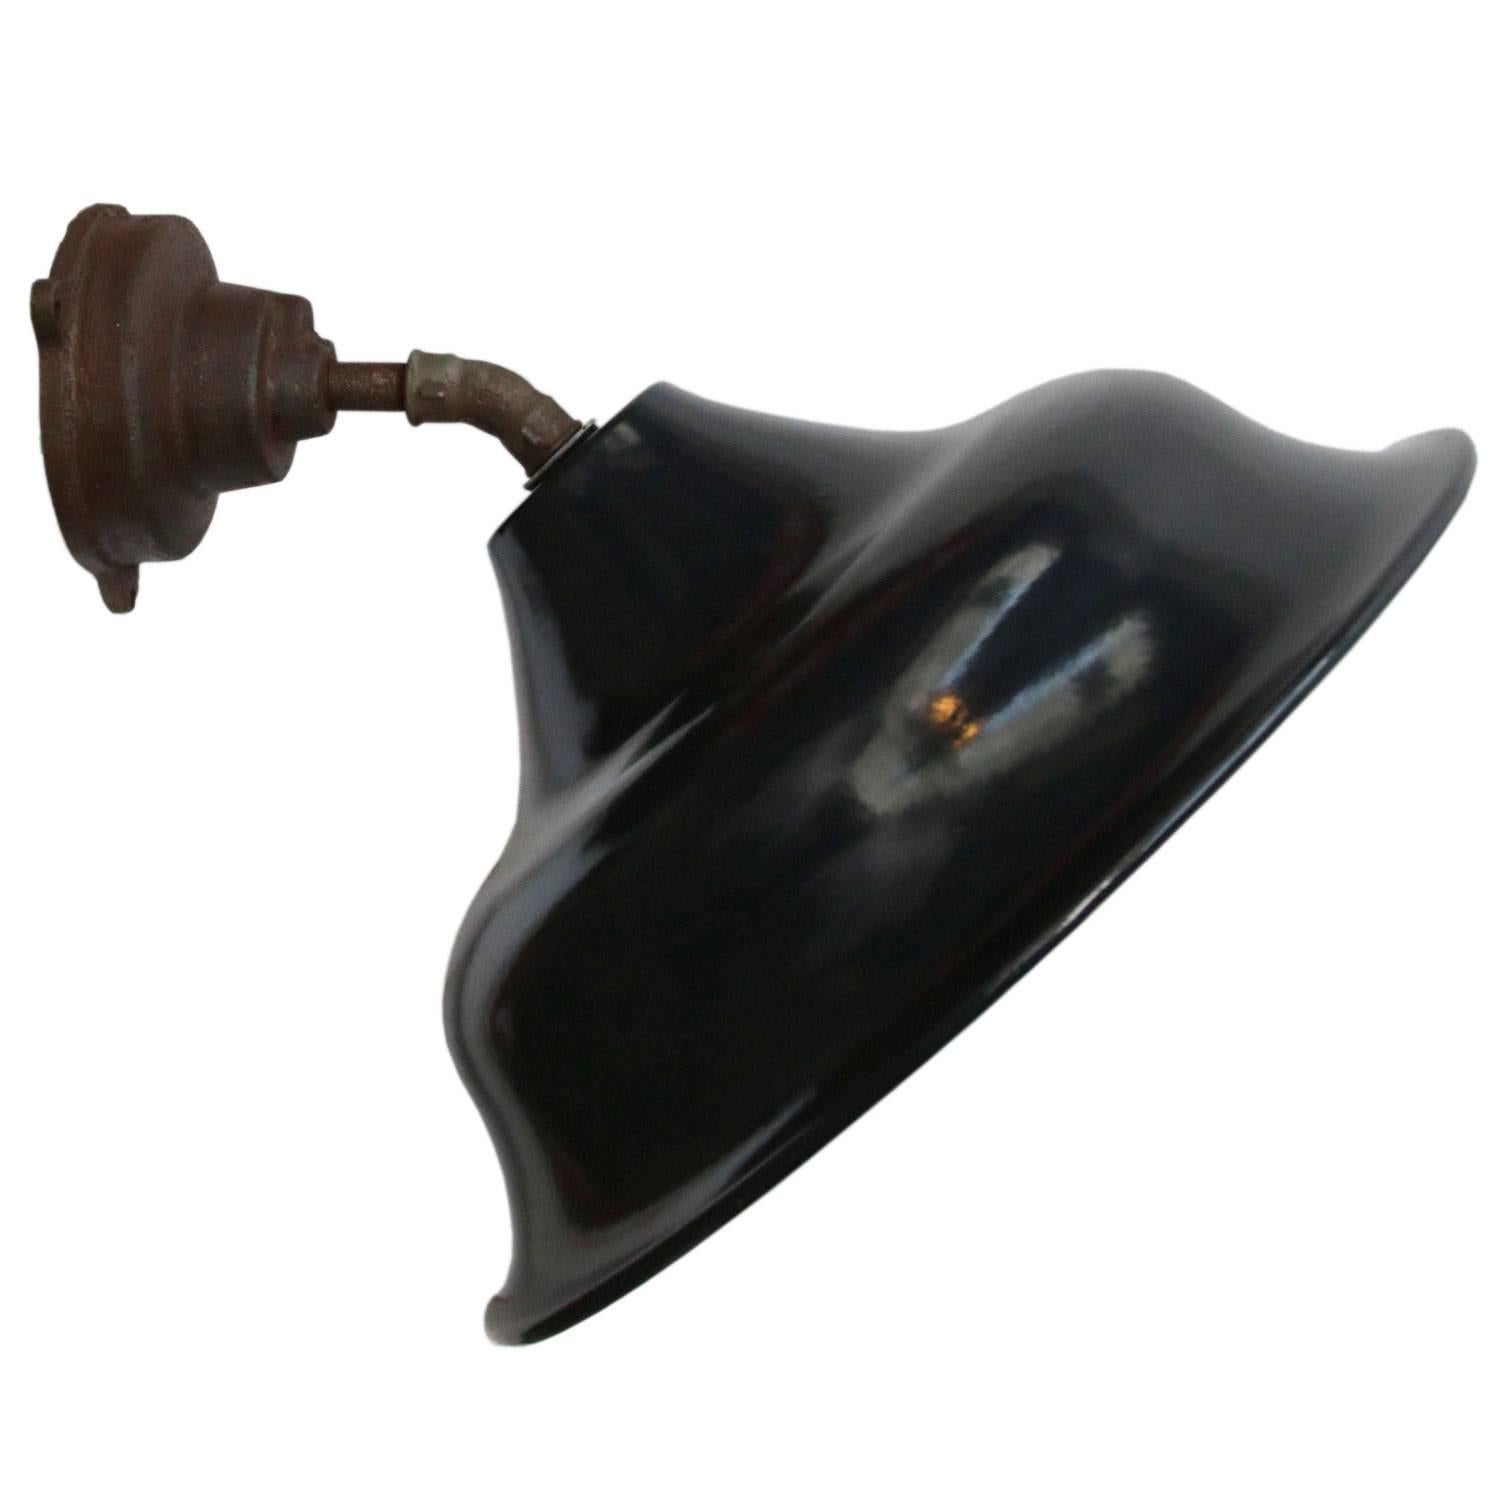 Black factory wall light
45 degrees. Black enamel, white interior. Cast iron arm and wall base.

Diameter cast iron wall piece: 12 cm, 3 holes to secure

Weight: 3.9 kg / 8.6 lb

All lamps have been made suitable by international standards